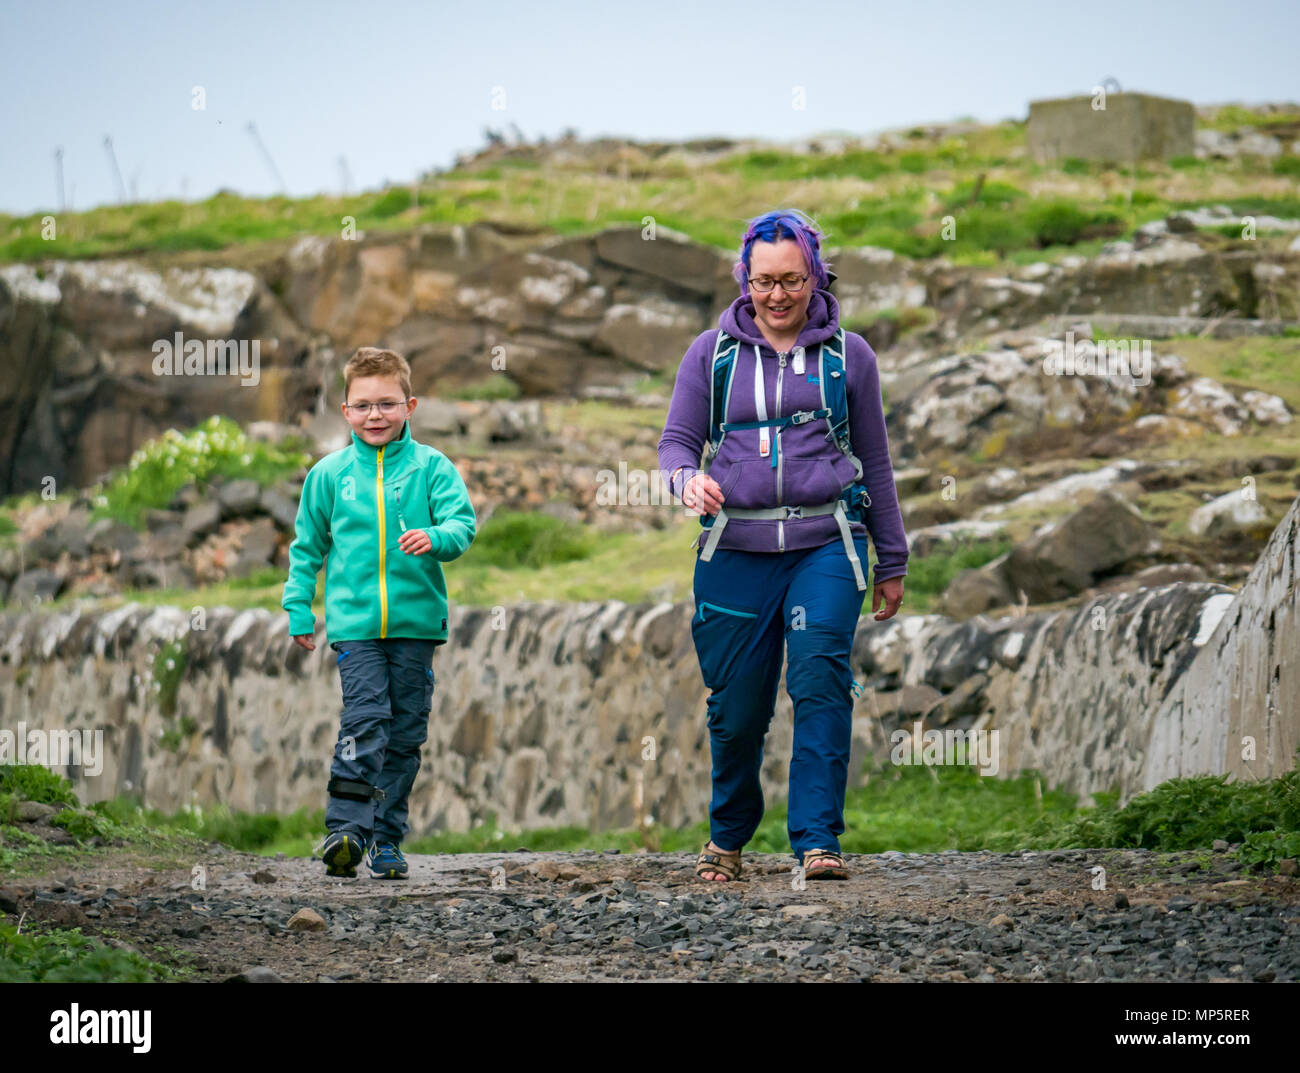 Woman with coloured hair and smiling young boy with glasses and leg brace walking on Isle of May, , Scotland, UK Stock Photo